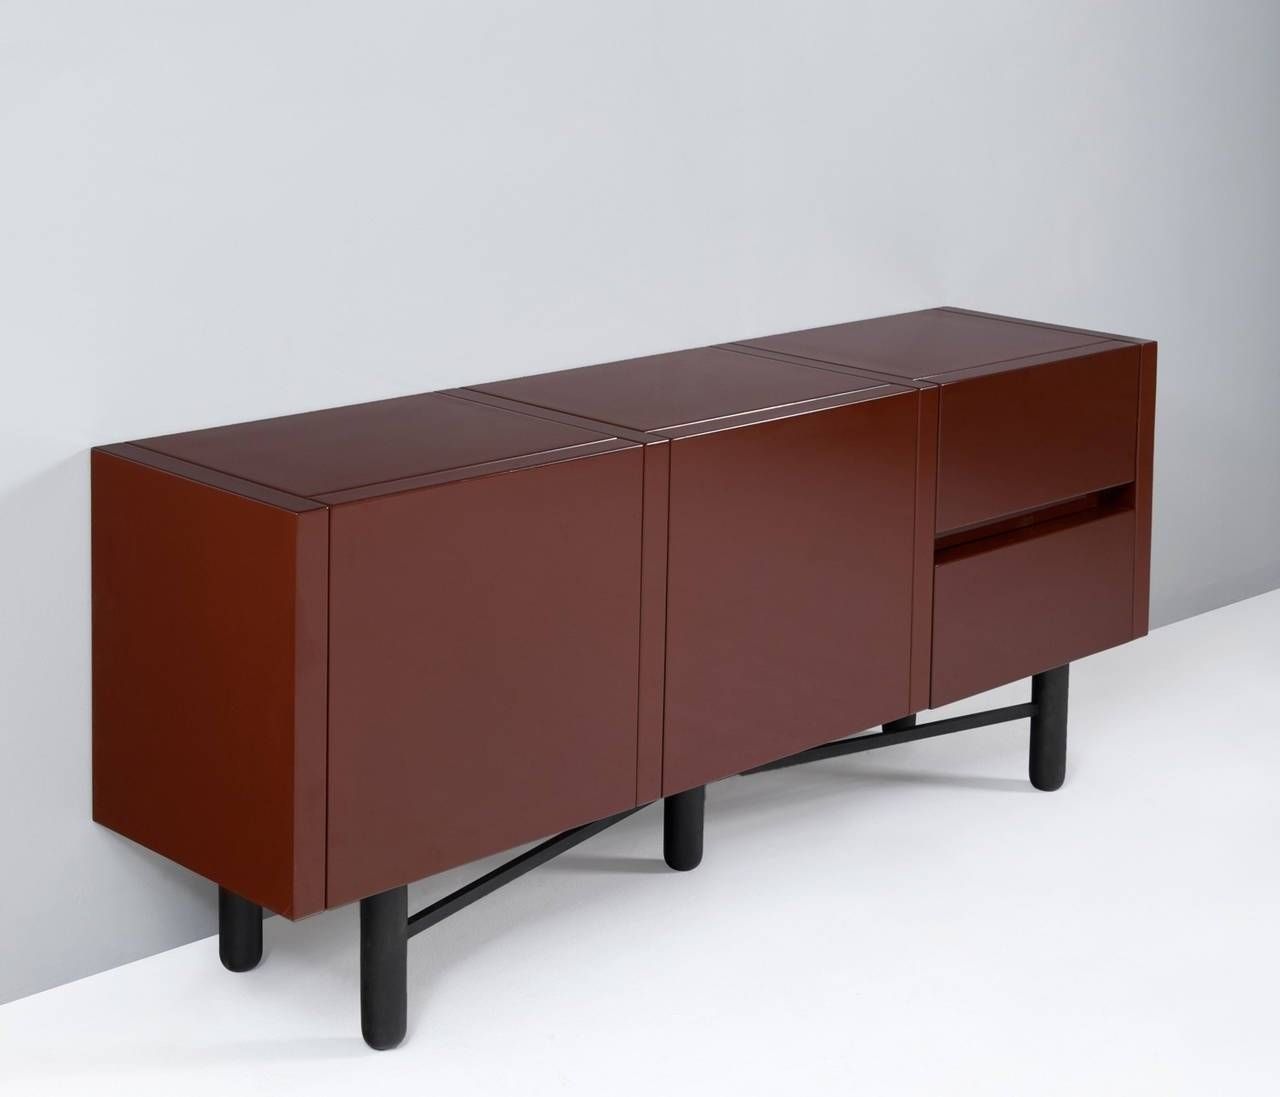 Roche Bobois Red Lacquered High Gloss Sideboard For Sale At 1stdibs Intended For High Gloss Black Sideboards (View 16 of 30)